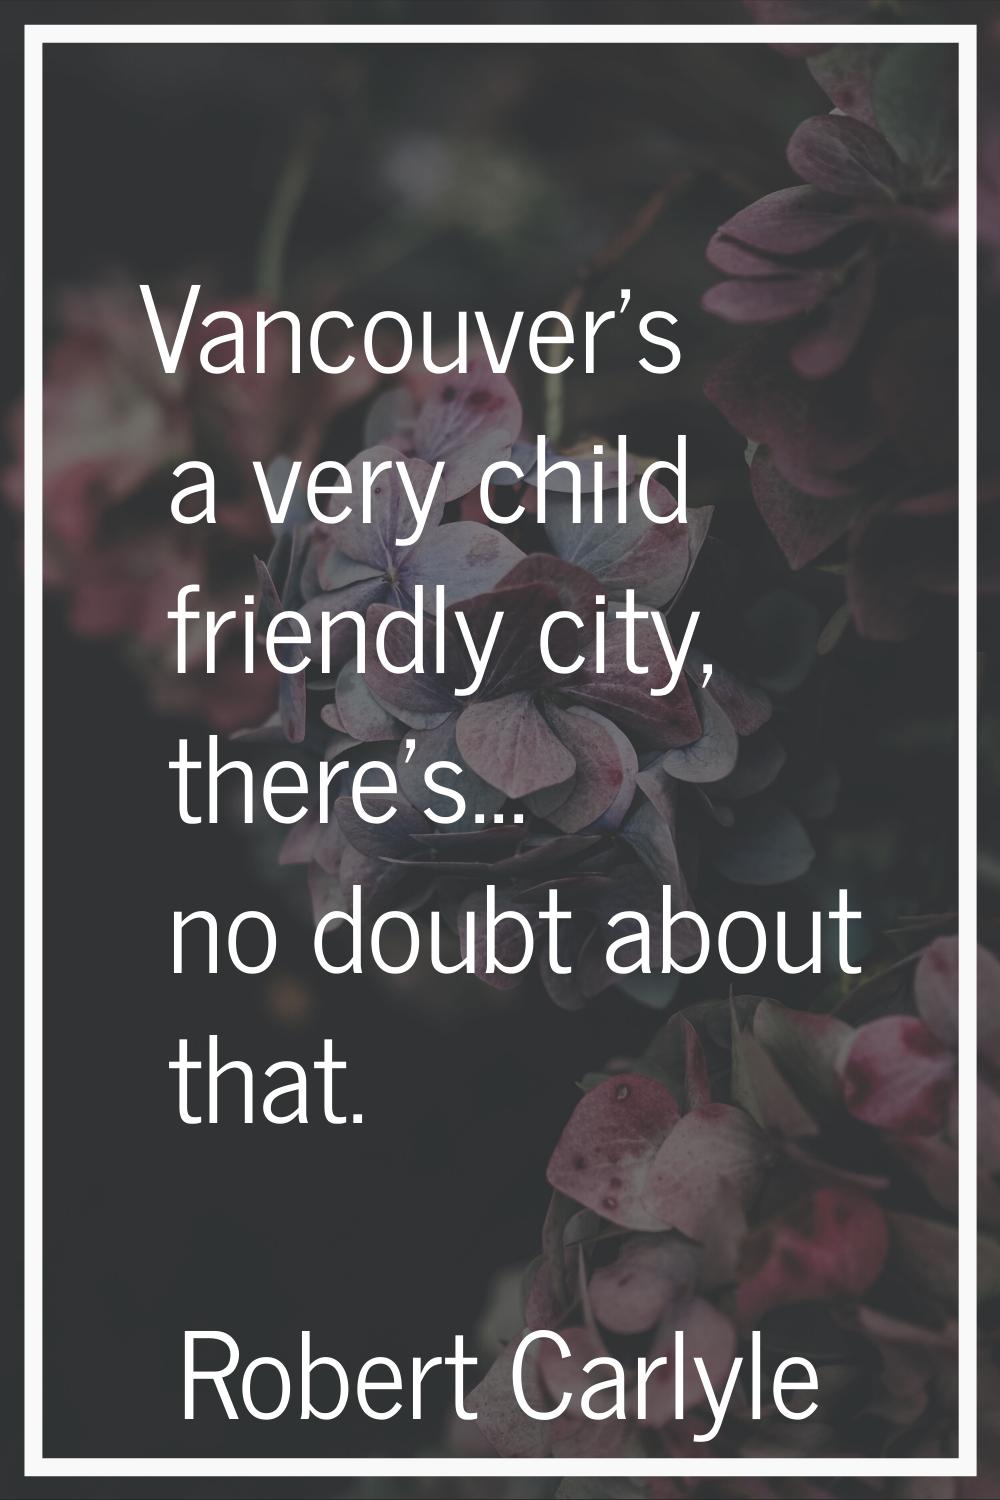 Vancouver's a very child friendly city, there's... no doubt about that.